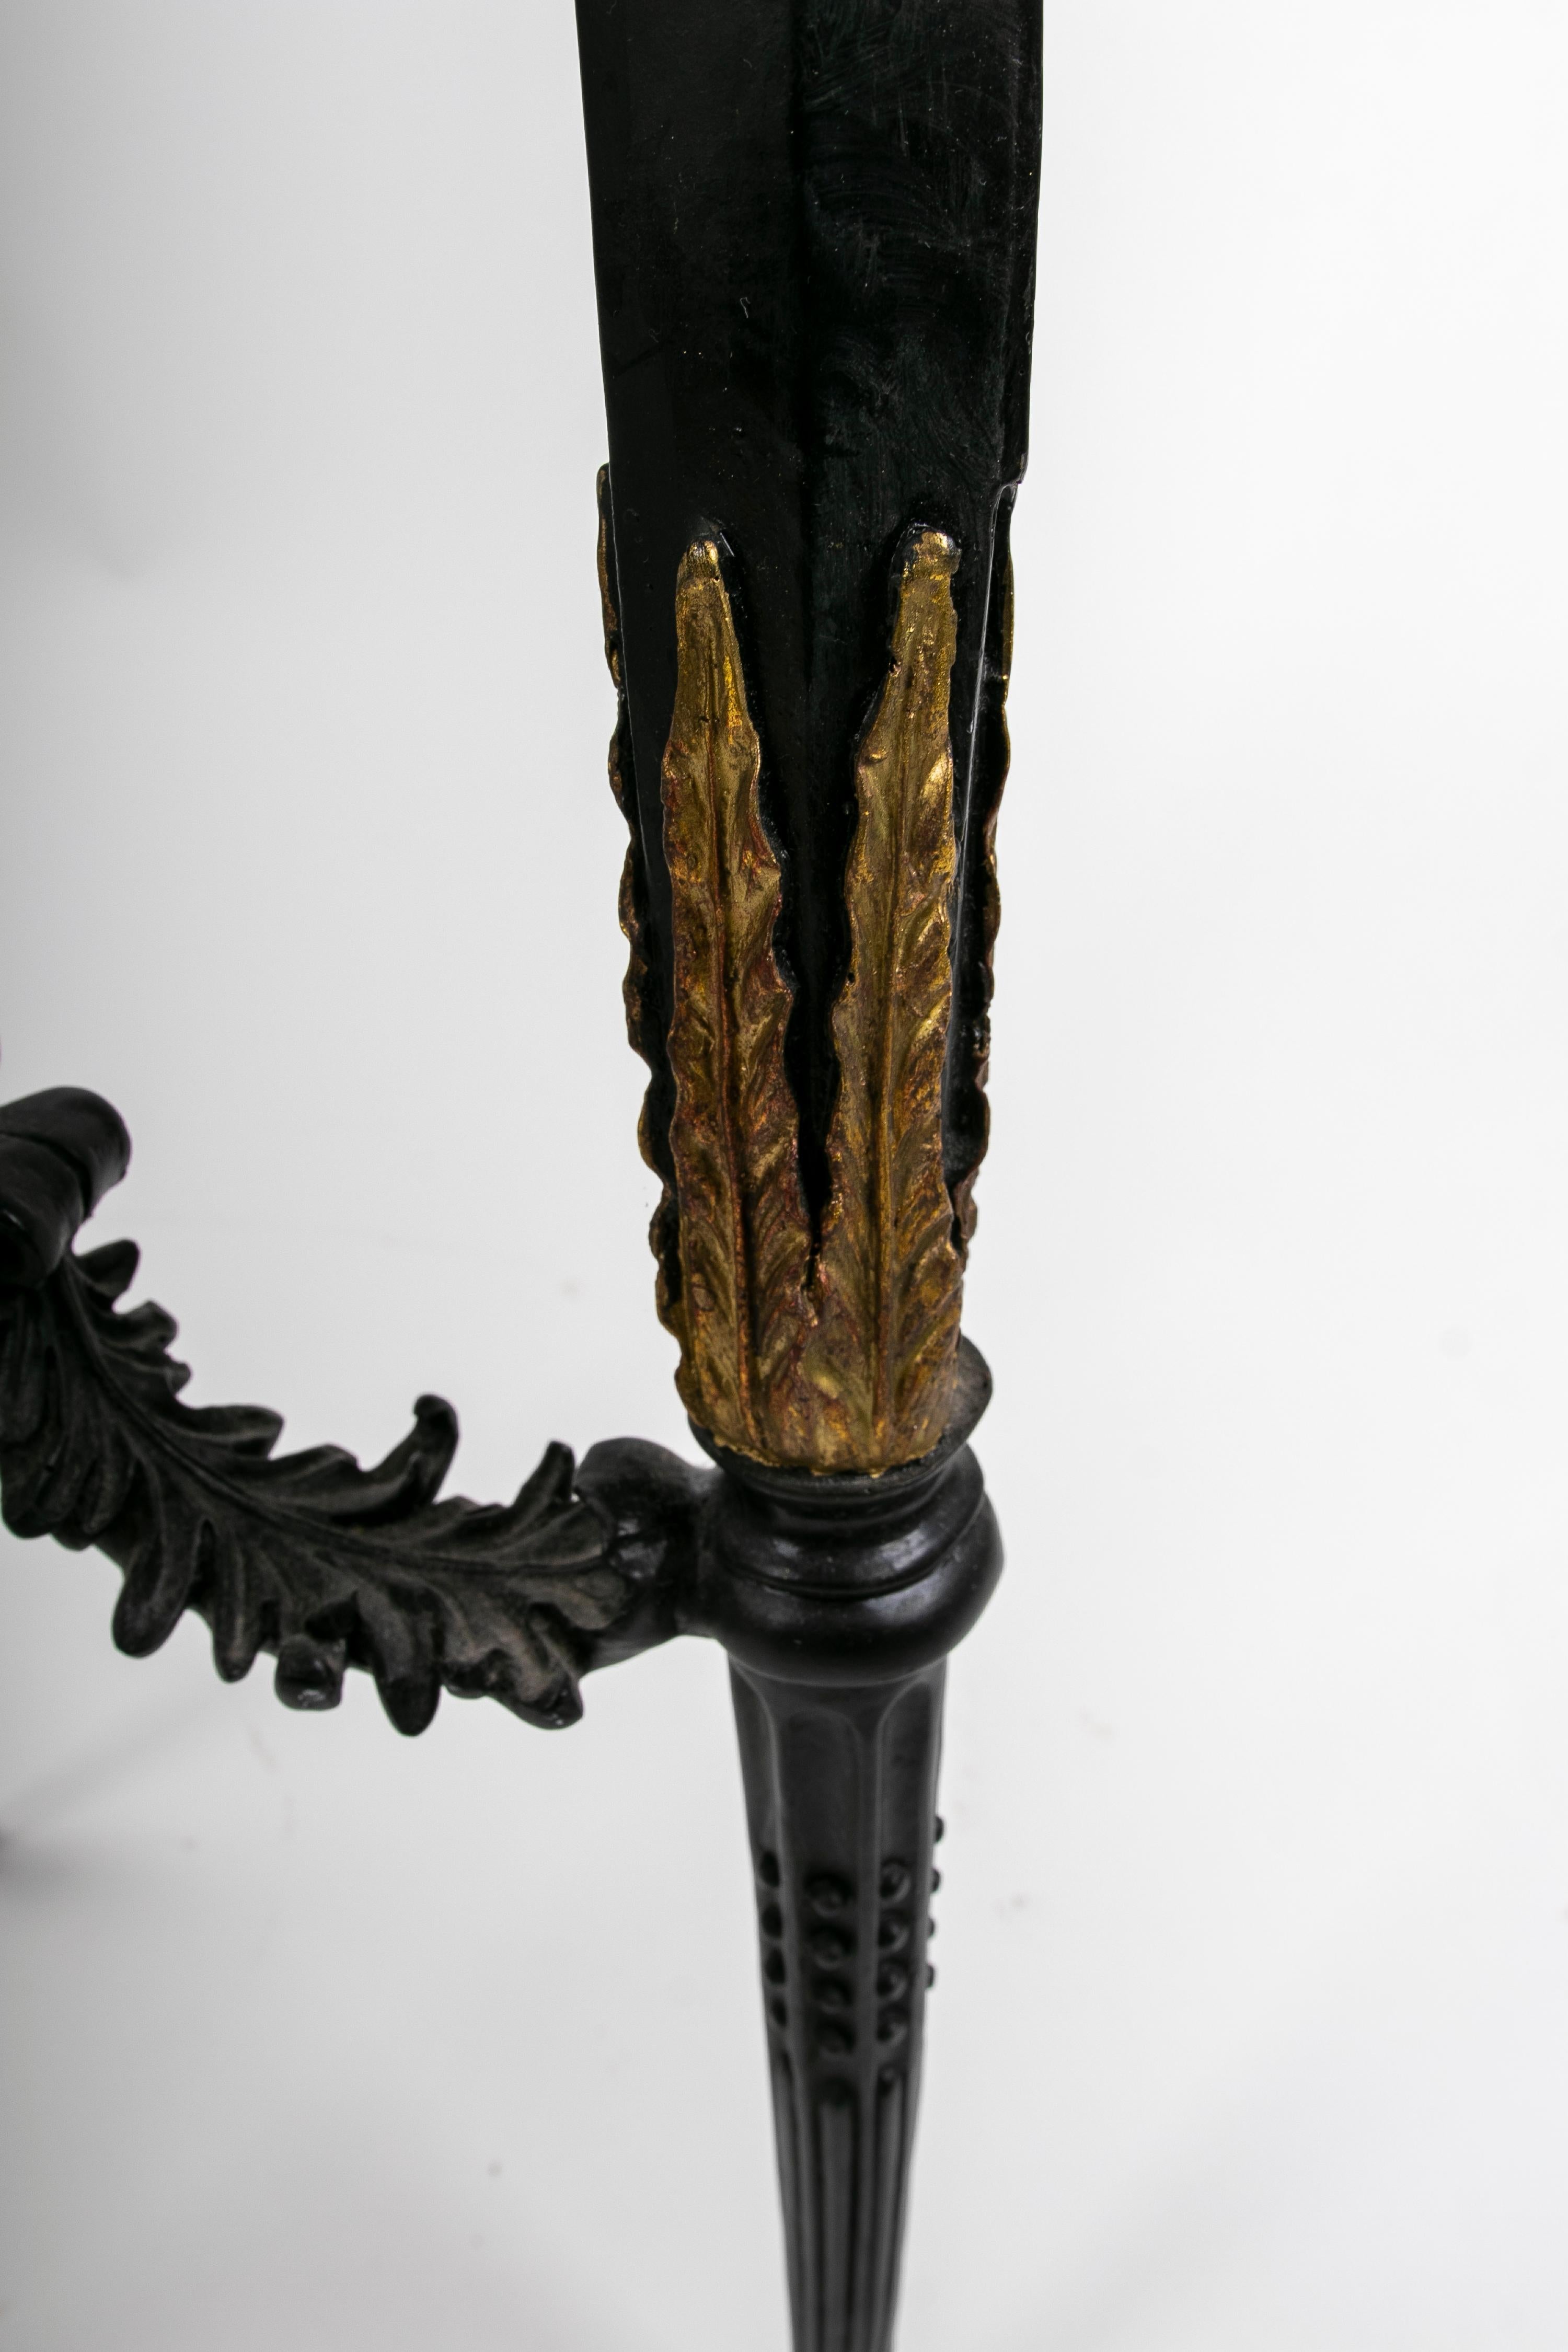 Polychromed Bronze Side Table with Winged Women on the Legs For Sale 5